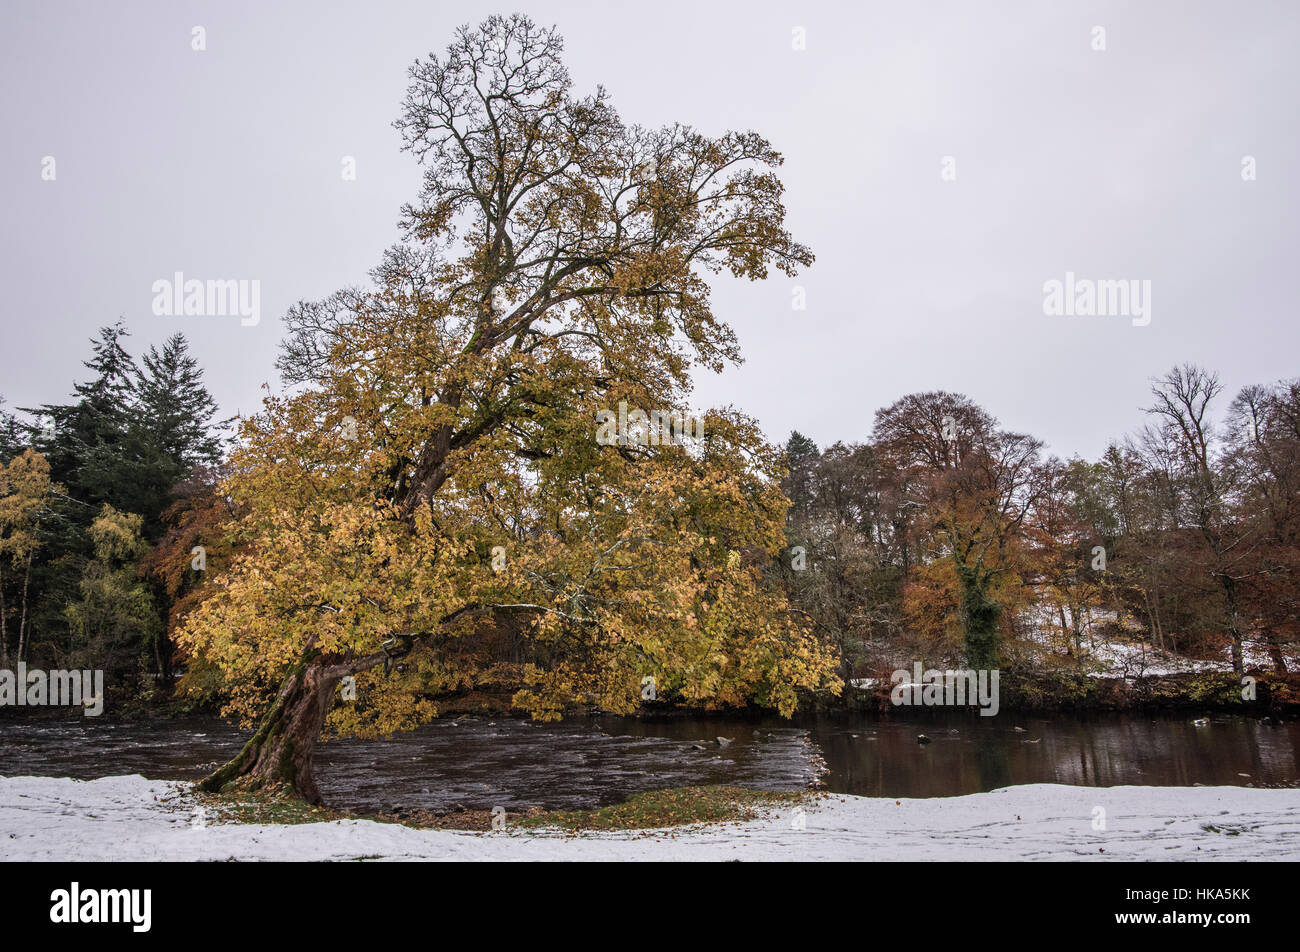 Sycamore tree in autumn with snow, Acer pseudoplatanus Stock Photo